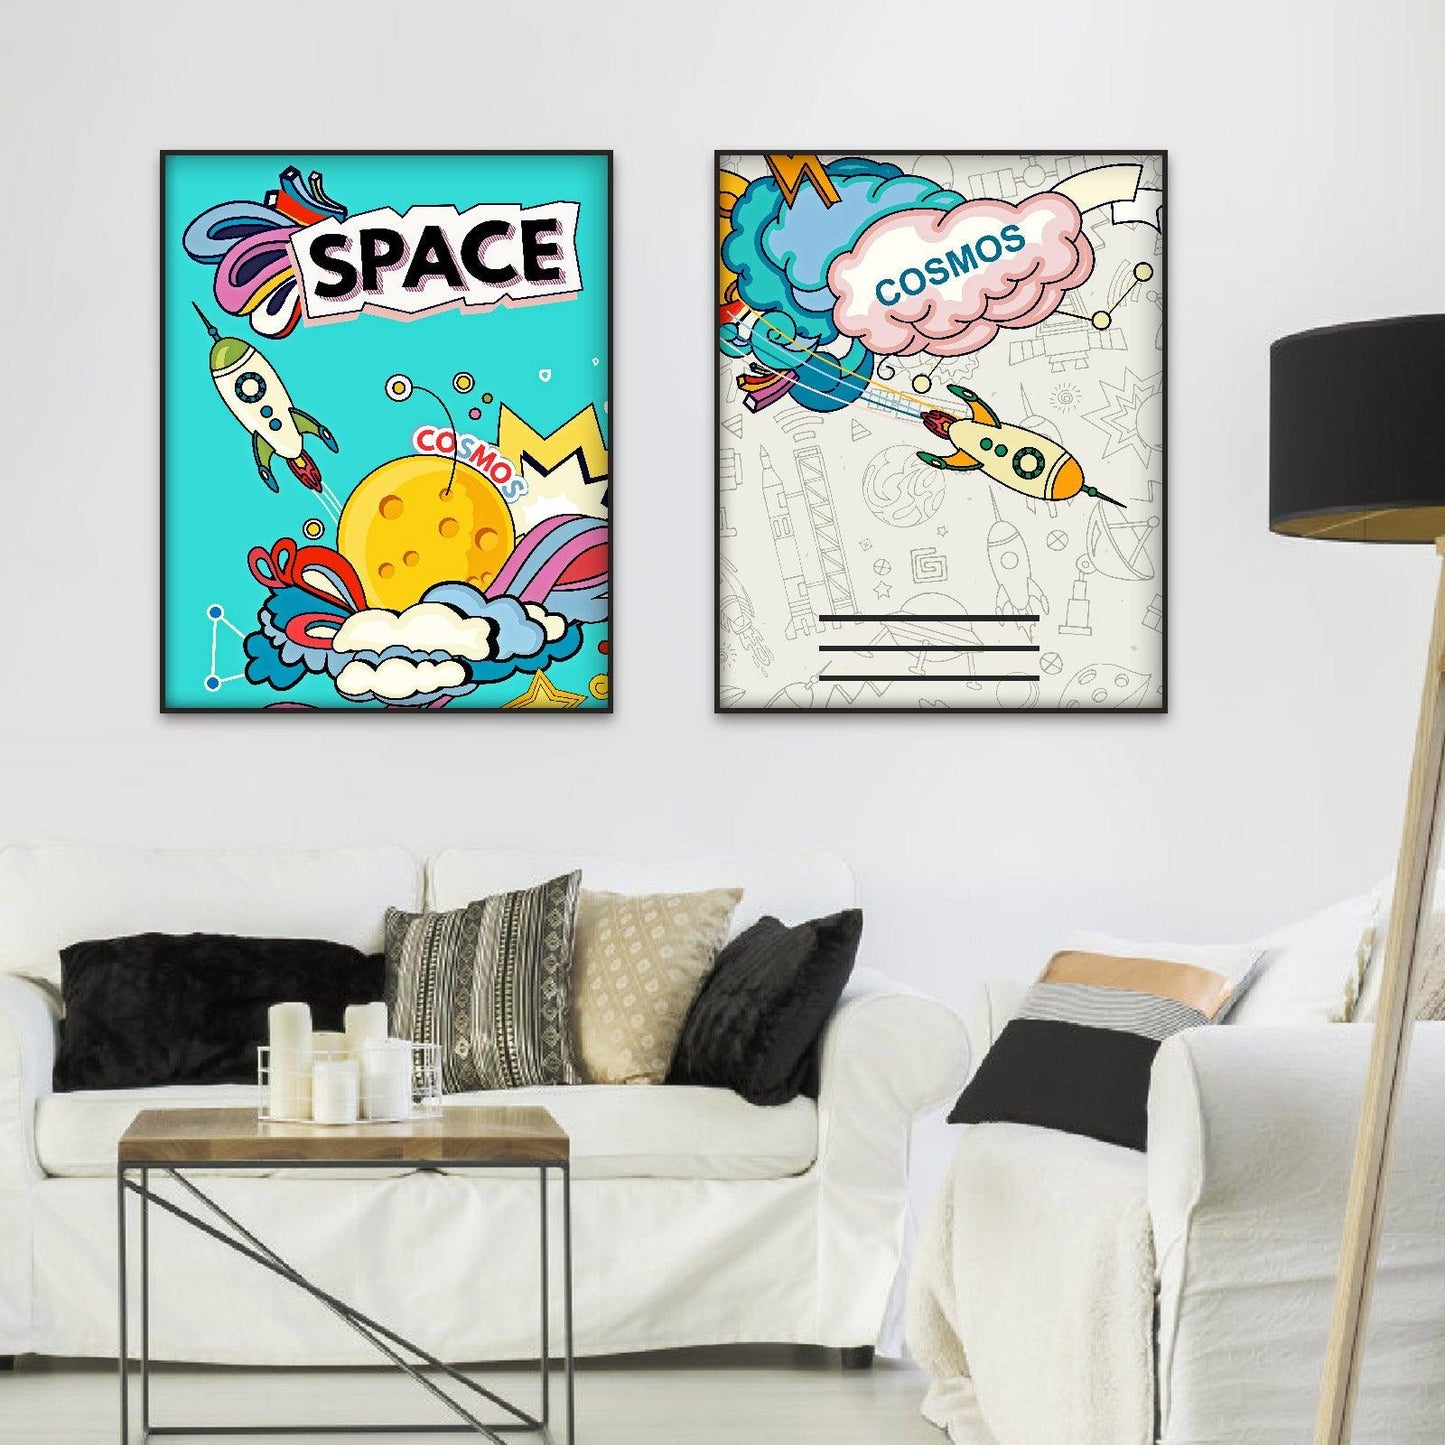 Contemporary Paper Giclee Prints Set of 4 (Space Series 3) - Berkin Arts